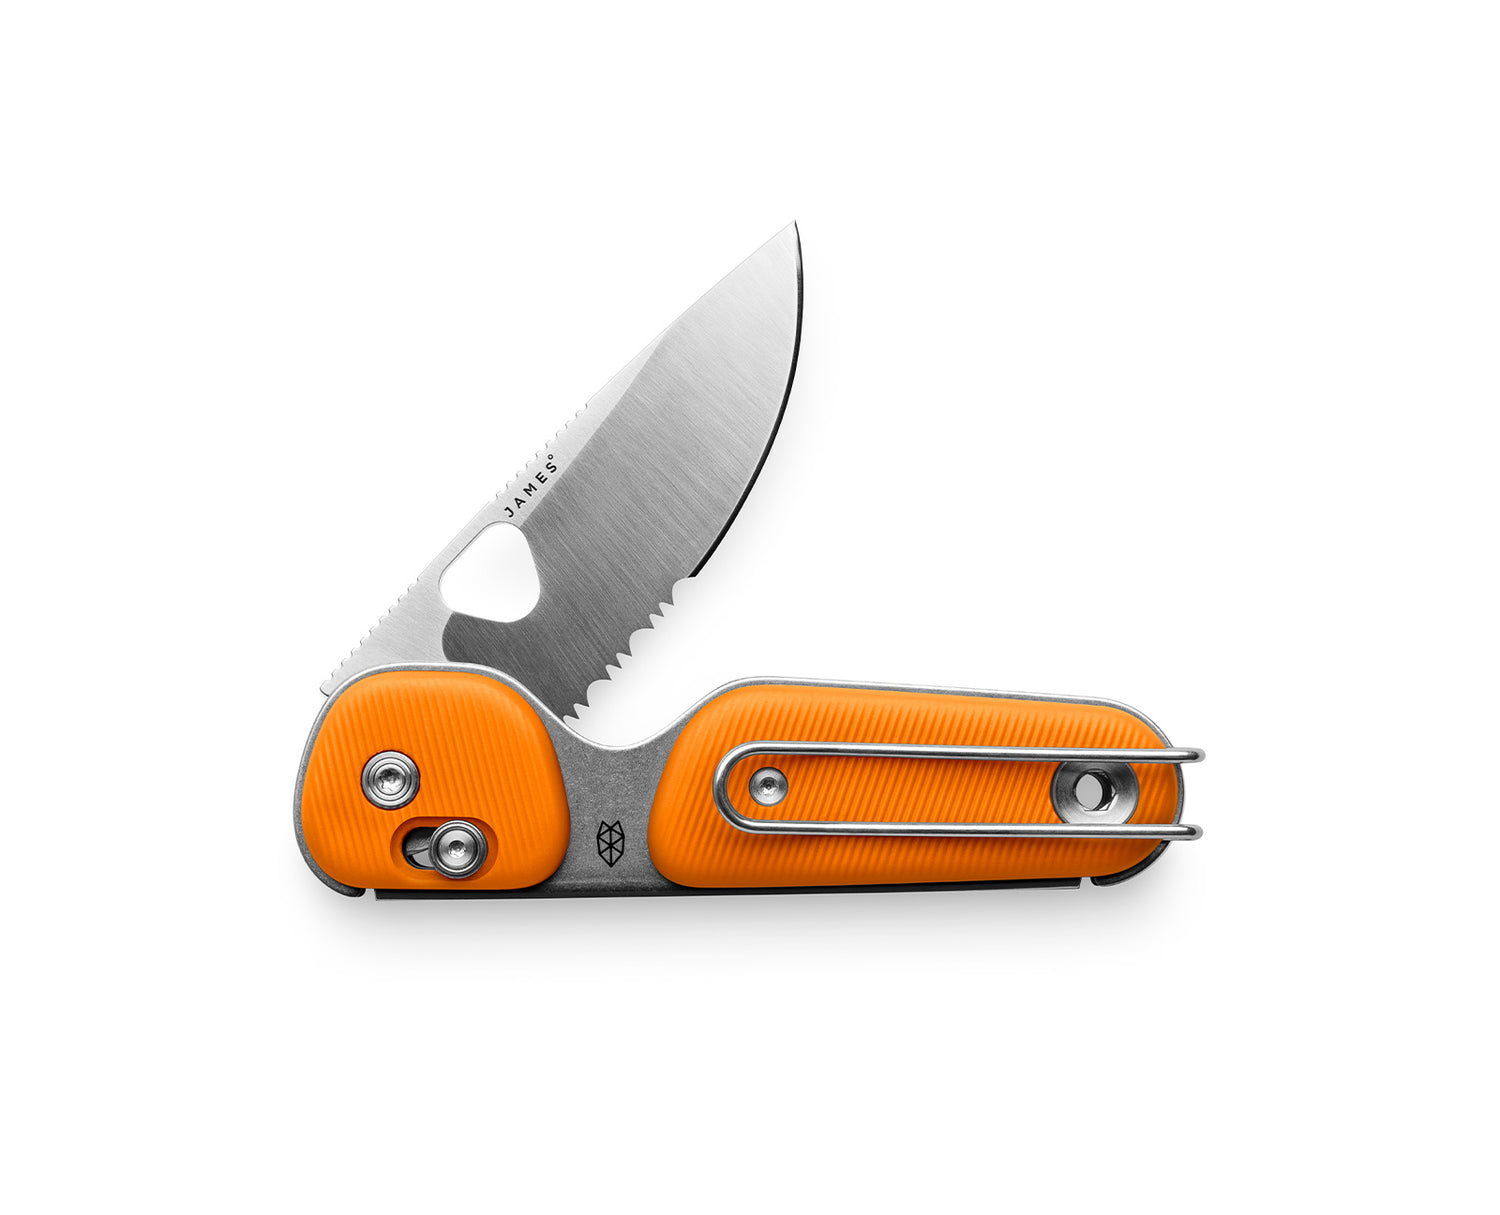 The Redstone knife with orange handle and serrated, stainless steel blade.